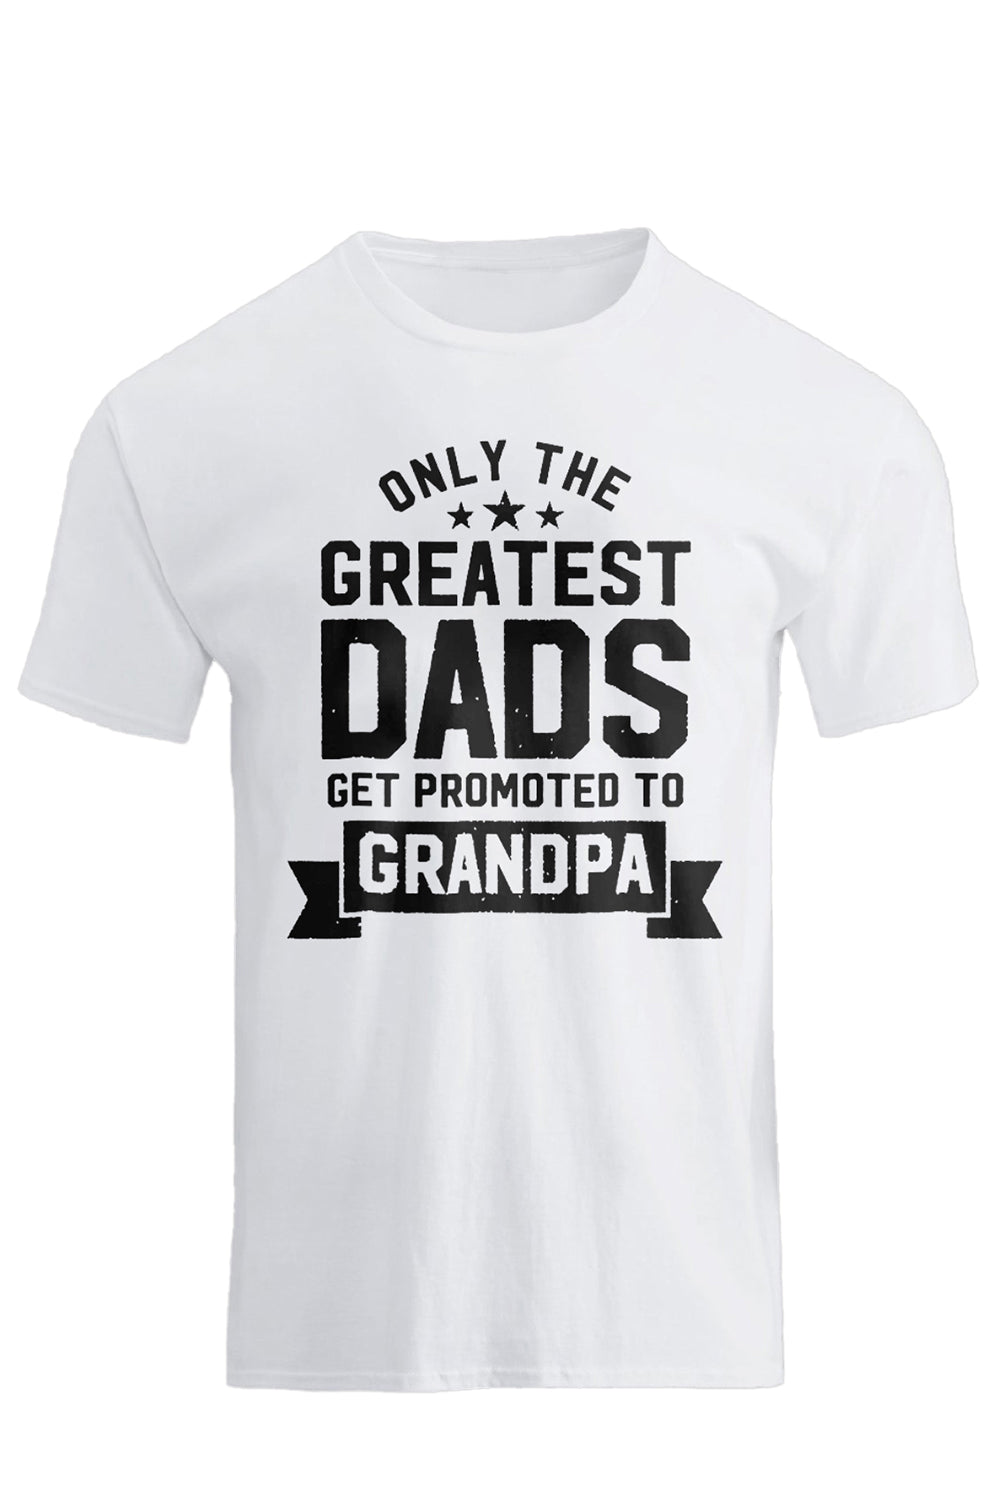 White Great Dads Get Promoted To Grandpa Funny Mens T Shirt Men's Tops JT's Designer Fashion